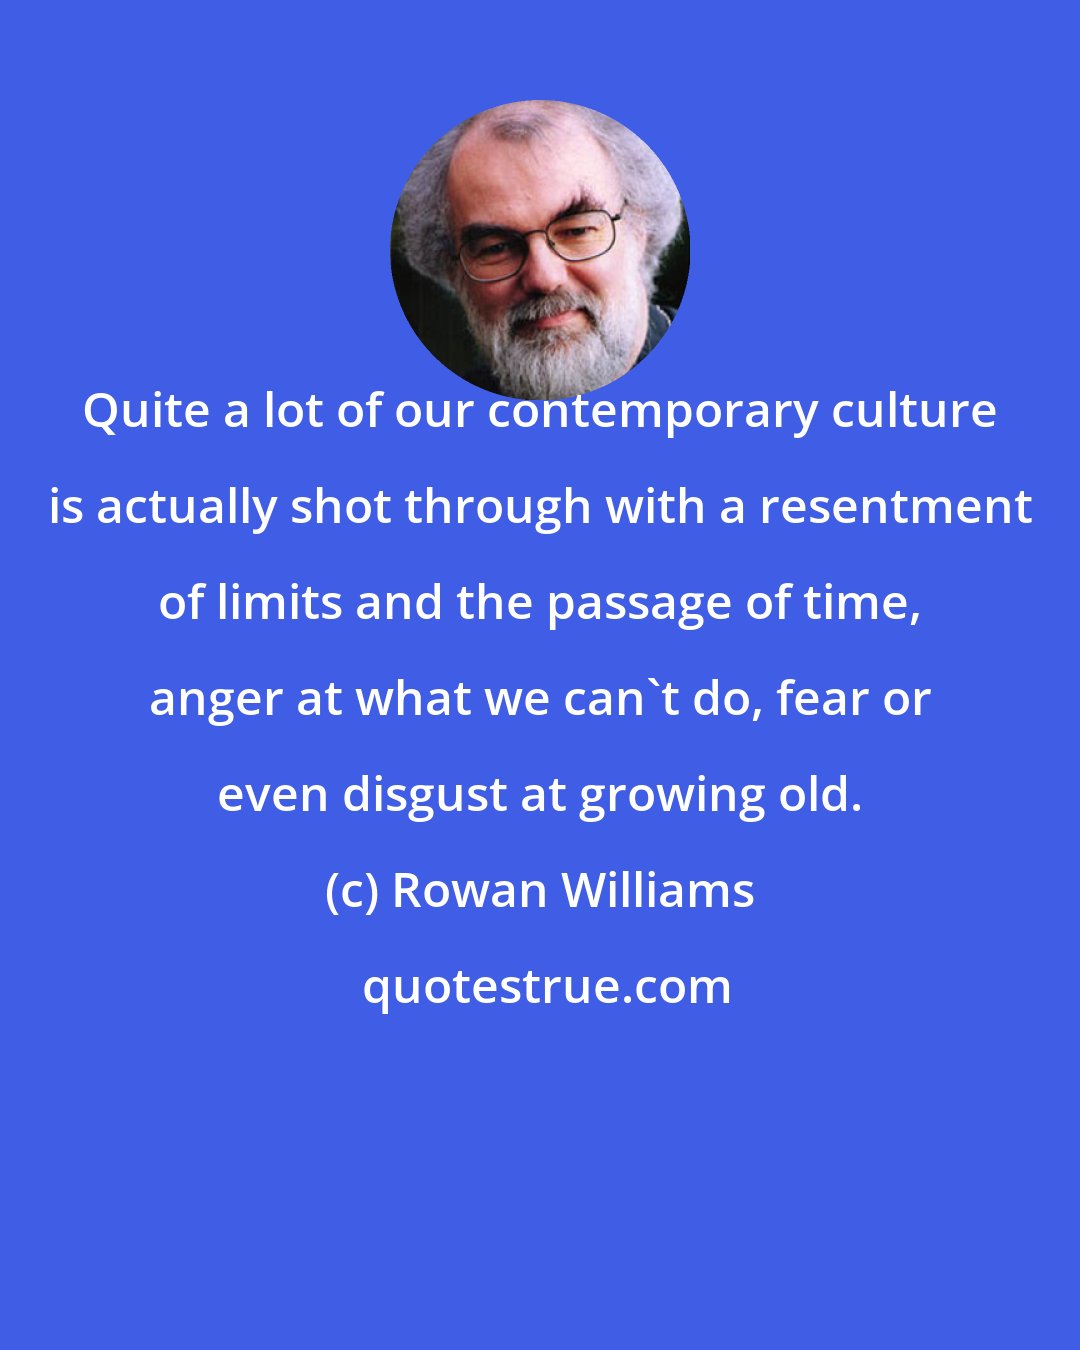 Rowan Williams: Quite a lot of our contemporary culture is actually shot through with a resentment of limits and the passage of time, anger at what we can't do, fear or even disgust at growing old.